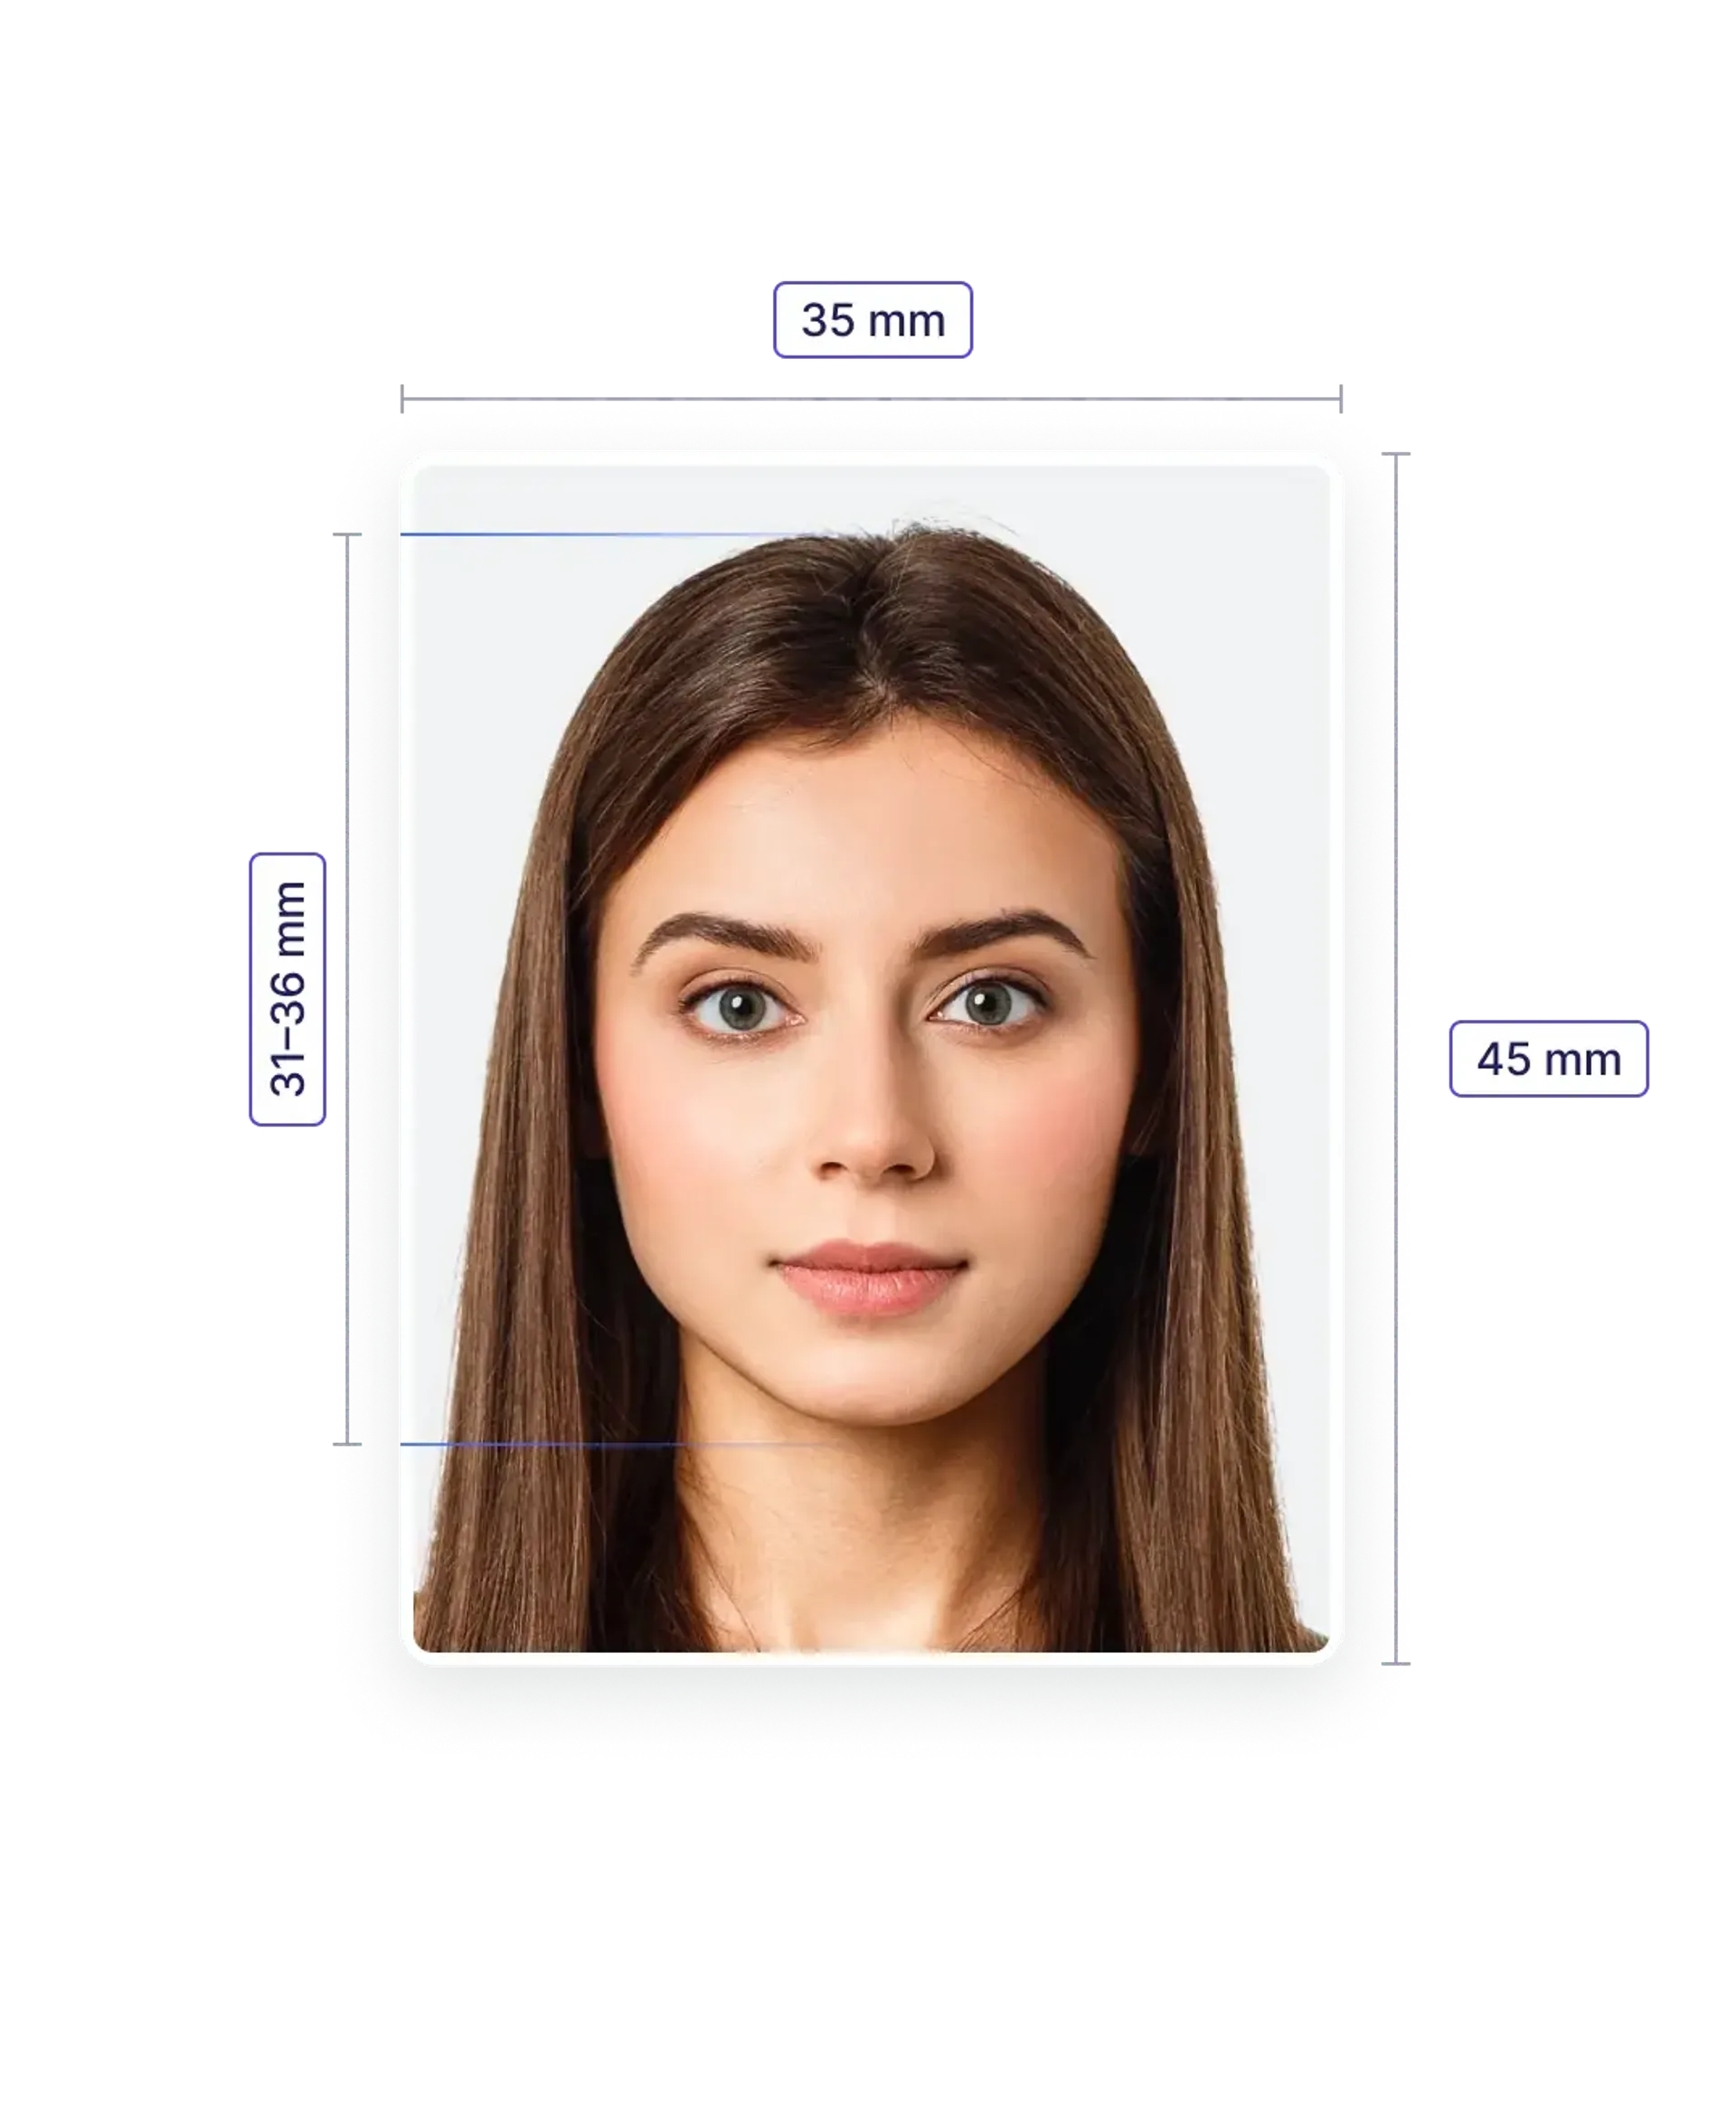 Canadian Visa Photo—Specifications